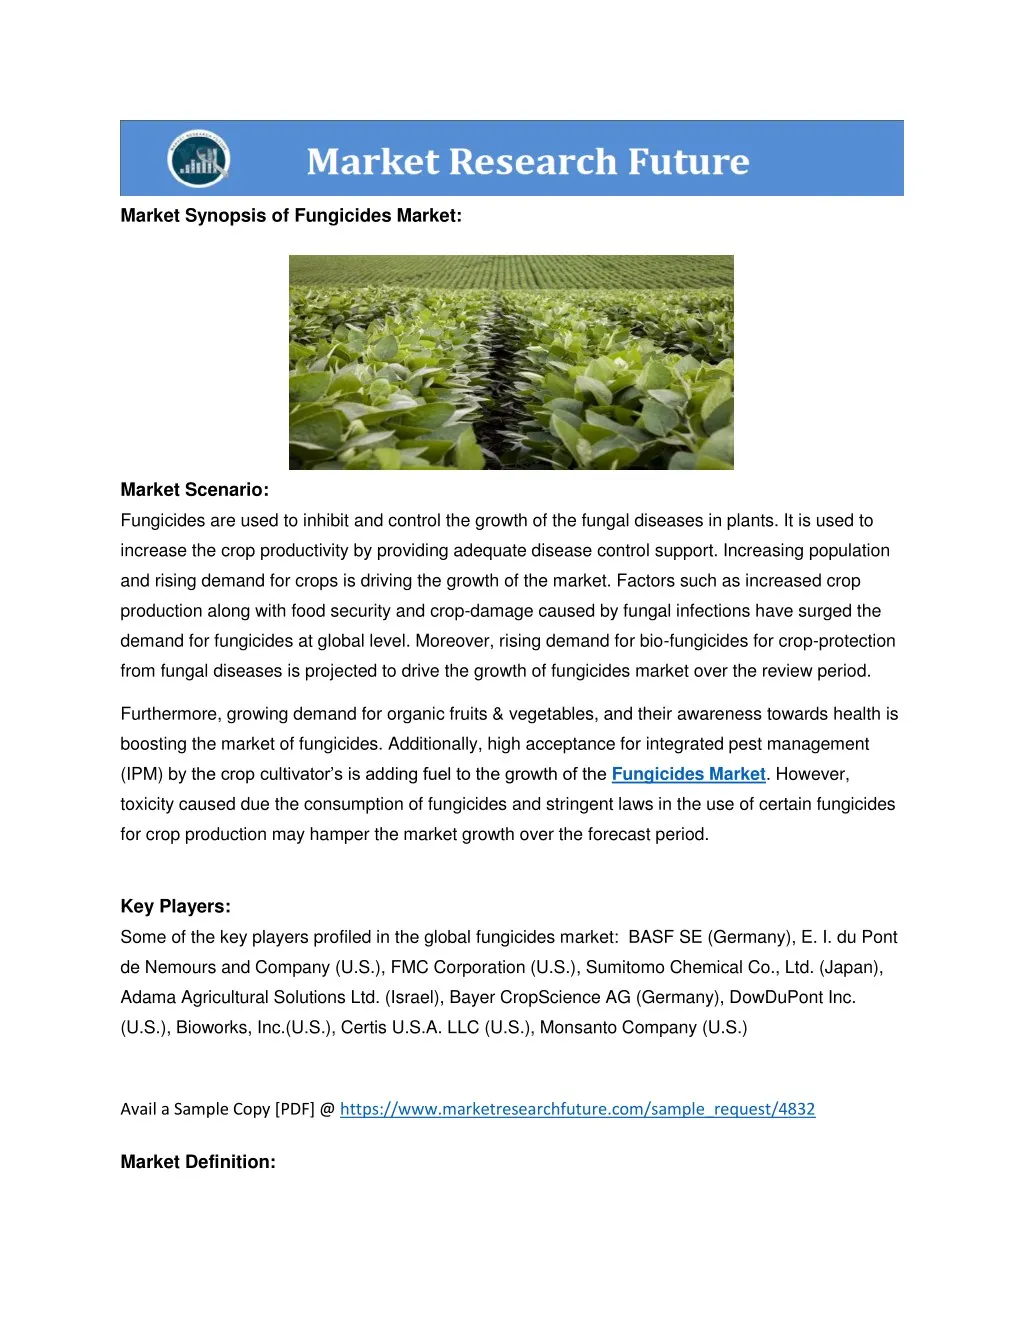 market synopsis of fungicides market